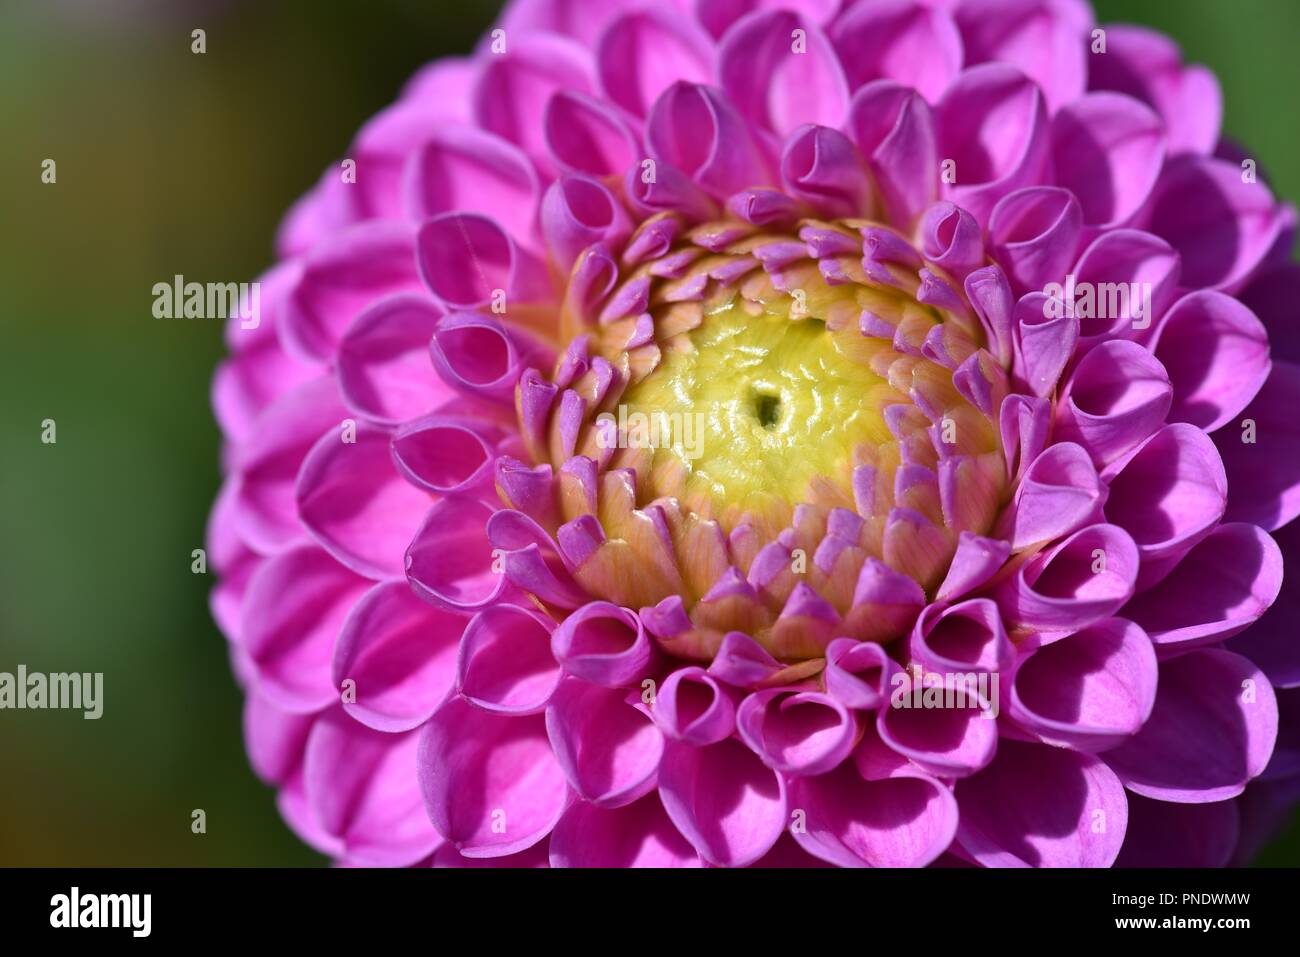 Dahlia (Asteraceae): the composite head of florets that make up a ball-shaped dahlia bloom Stock Photo